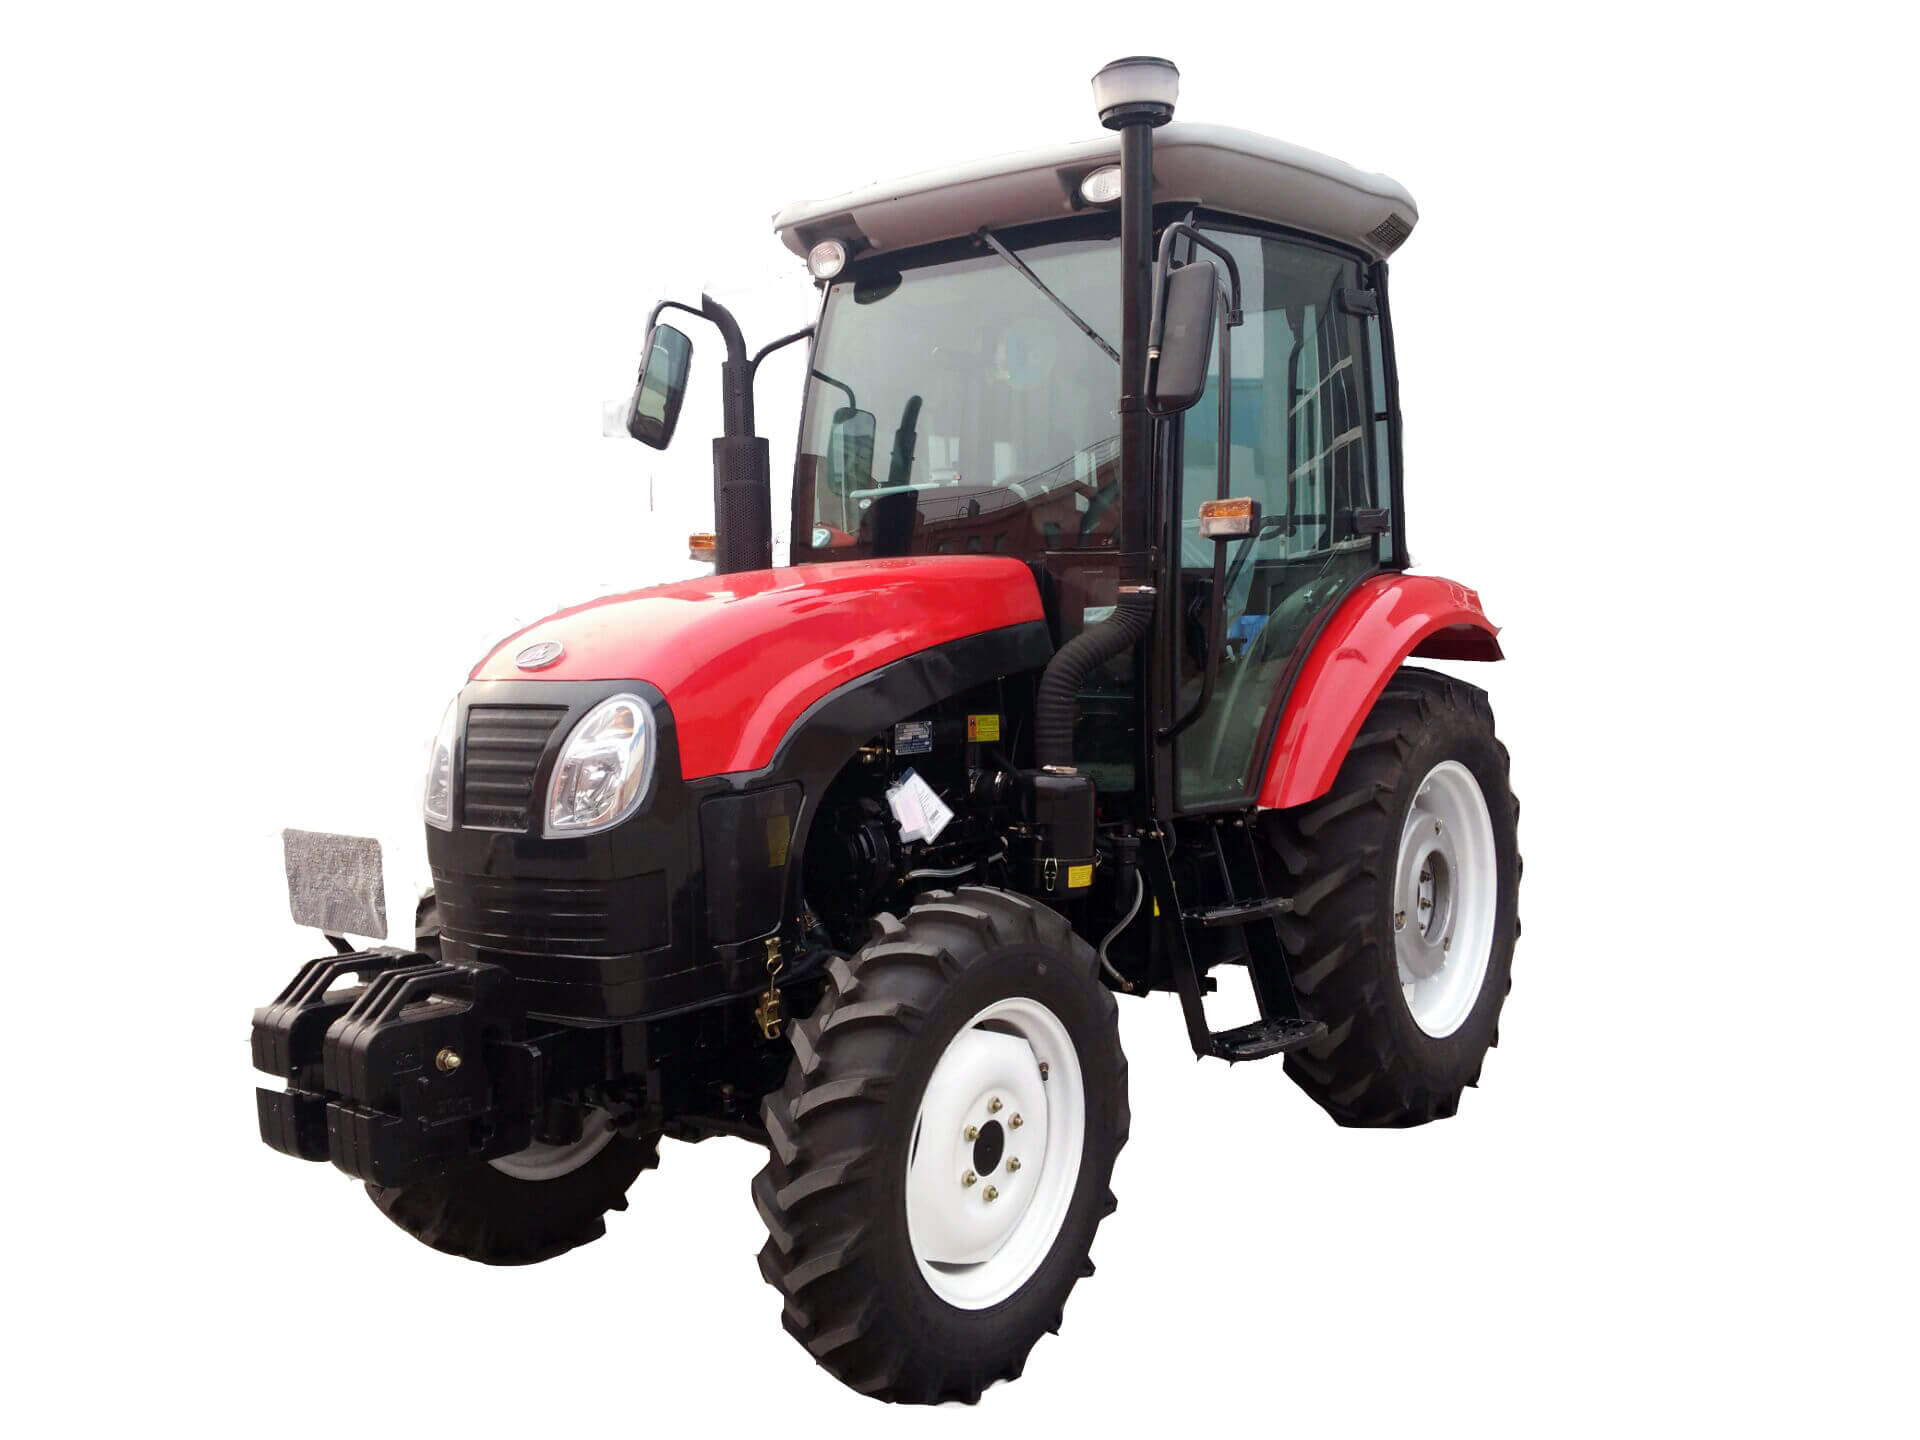 K&F SJH SC 4070 Farm Agriculure Tractor